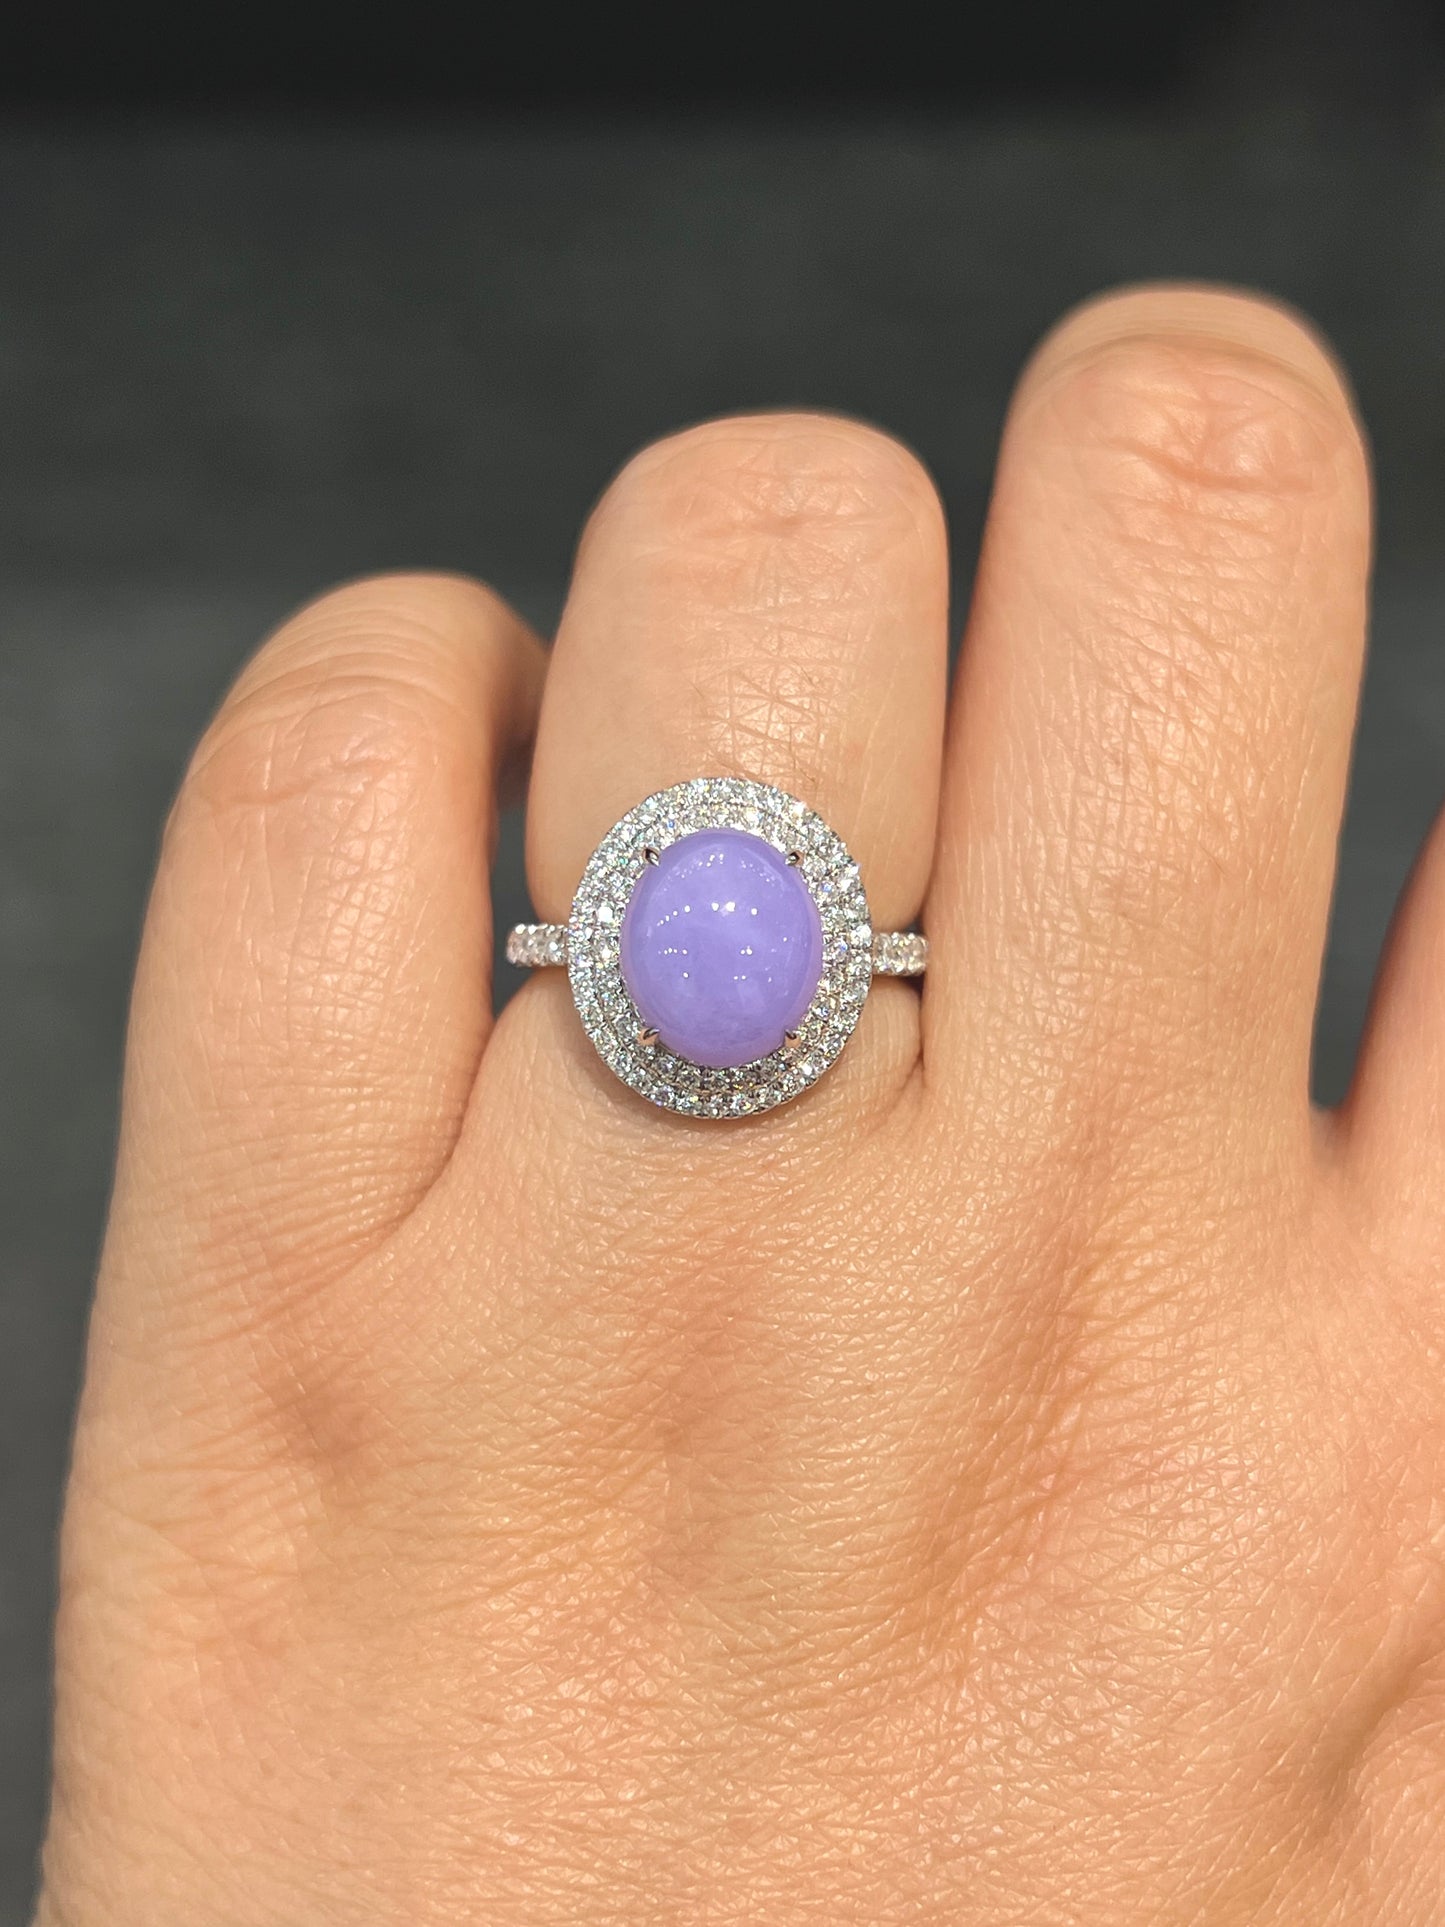 Natural Type A Lavendar Jadeite 3.72ct Ring Set With Natural Diamonds In 18K White Gold